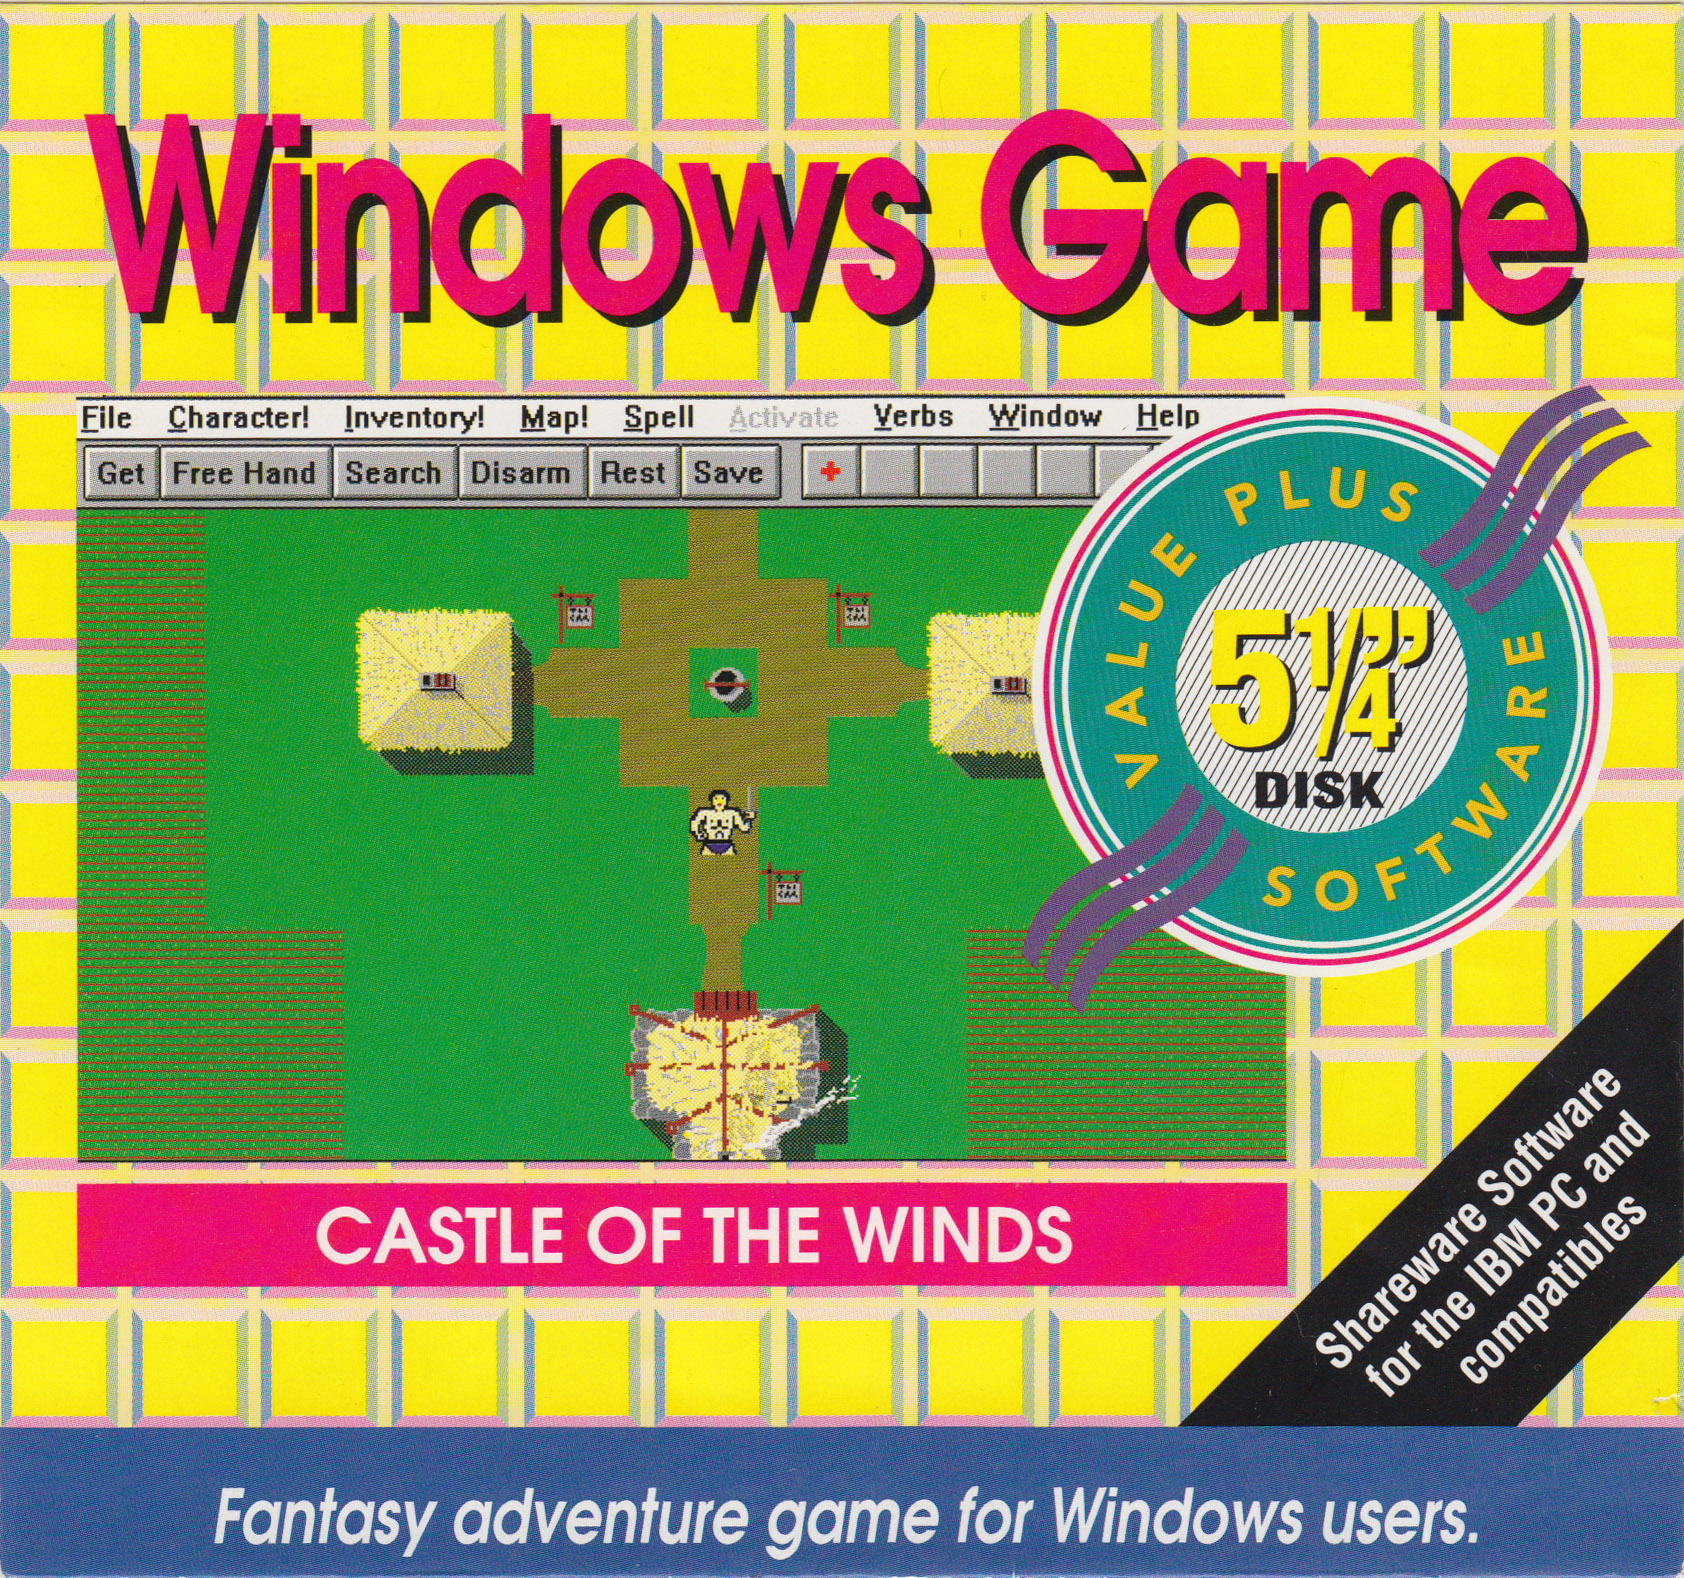 castle-of-the-winds-a-question-of-vengeance-details-launchbox-games-database